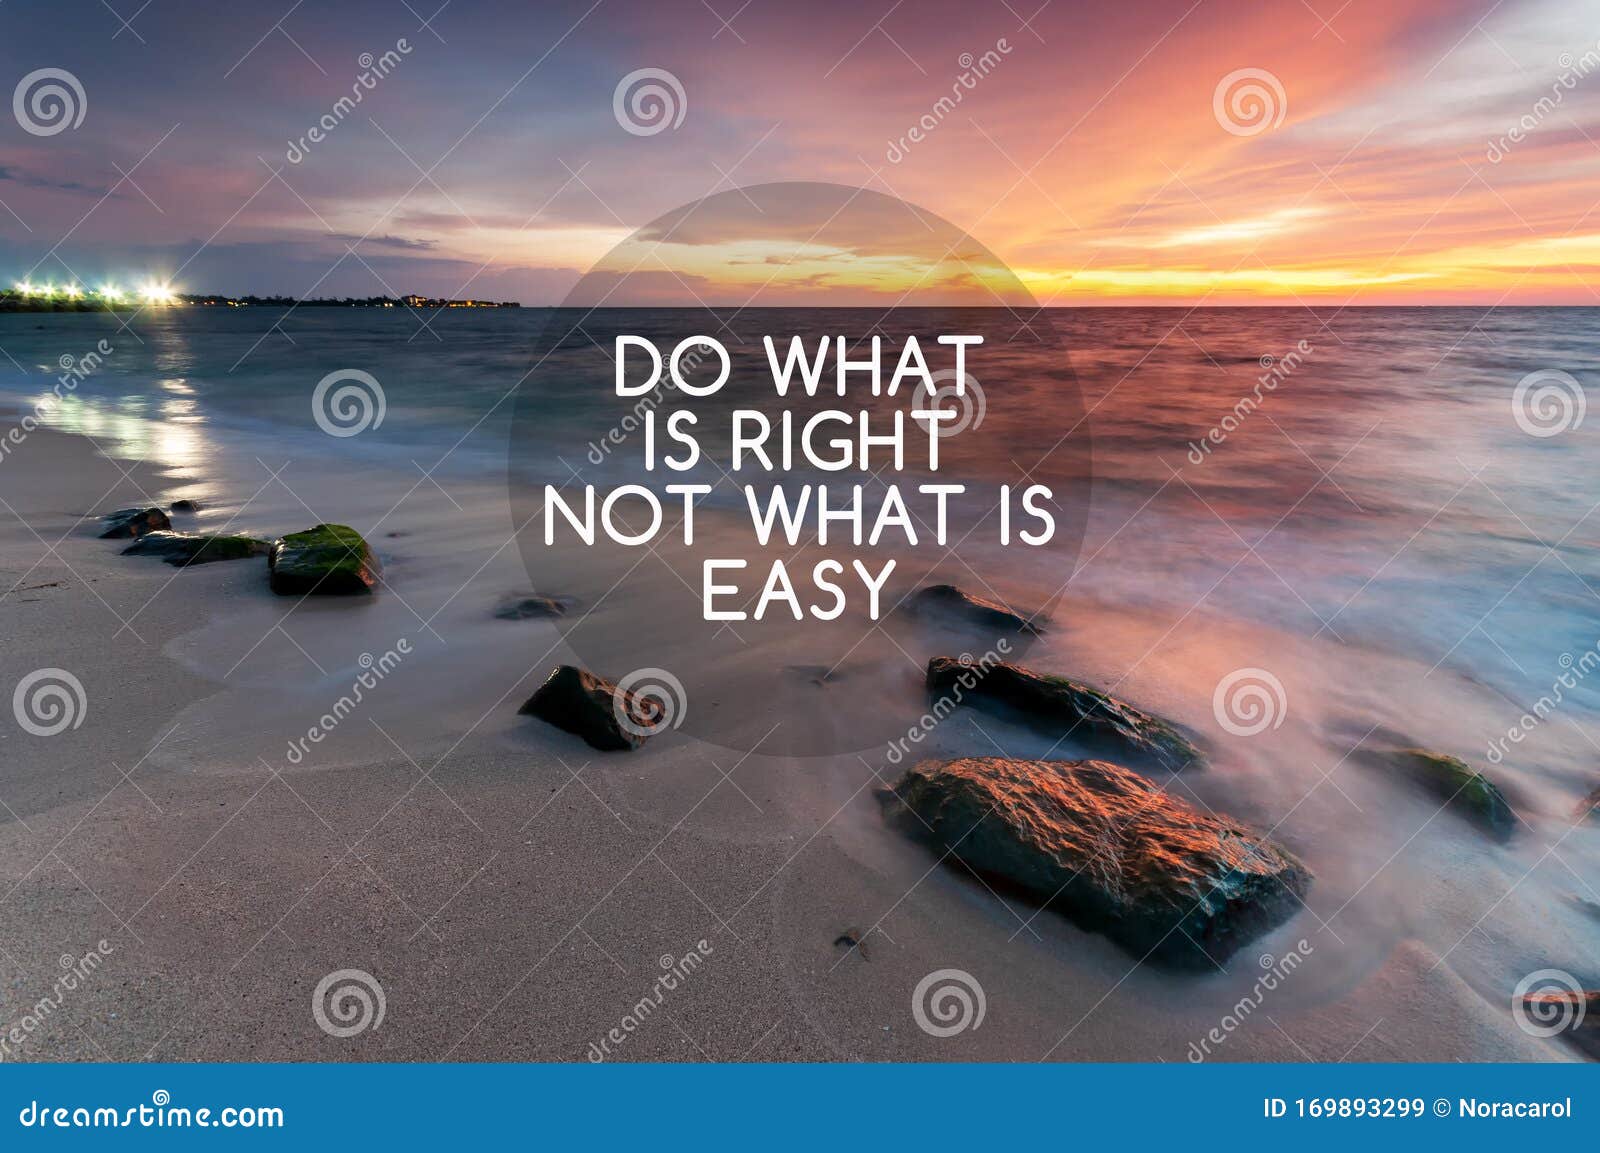 inspirational quotes - do what is right not what is easy